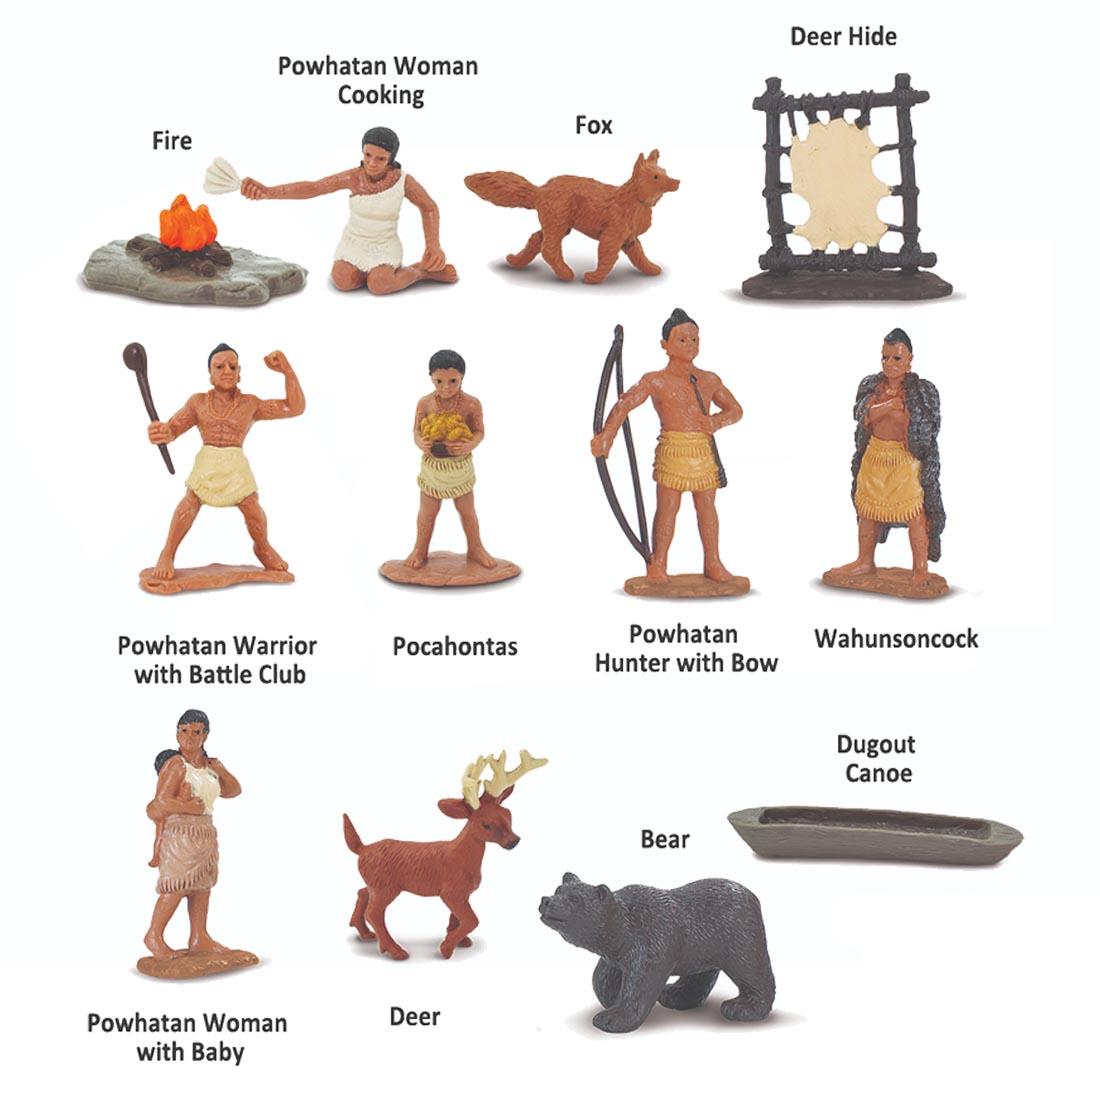 12 pieces from the Powhatan Indians Figurine Set labeled with their names: fire, woman cooking, fox, deer hide, warrior, Pocahontas, hunter, Wahunsoncock, woman with baby, dugout canoe, etc.